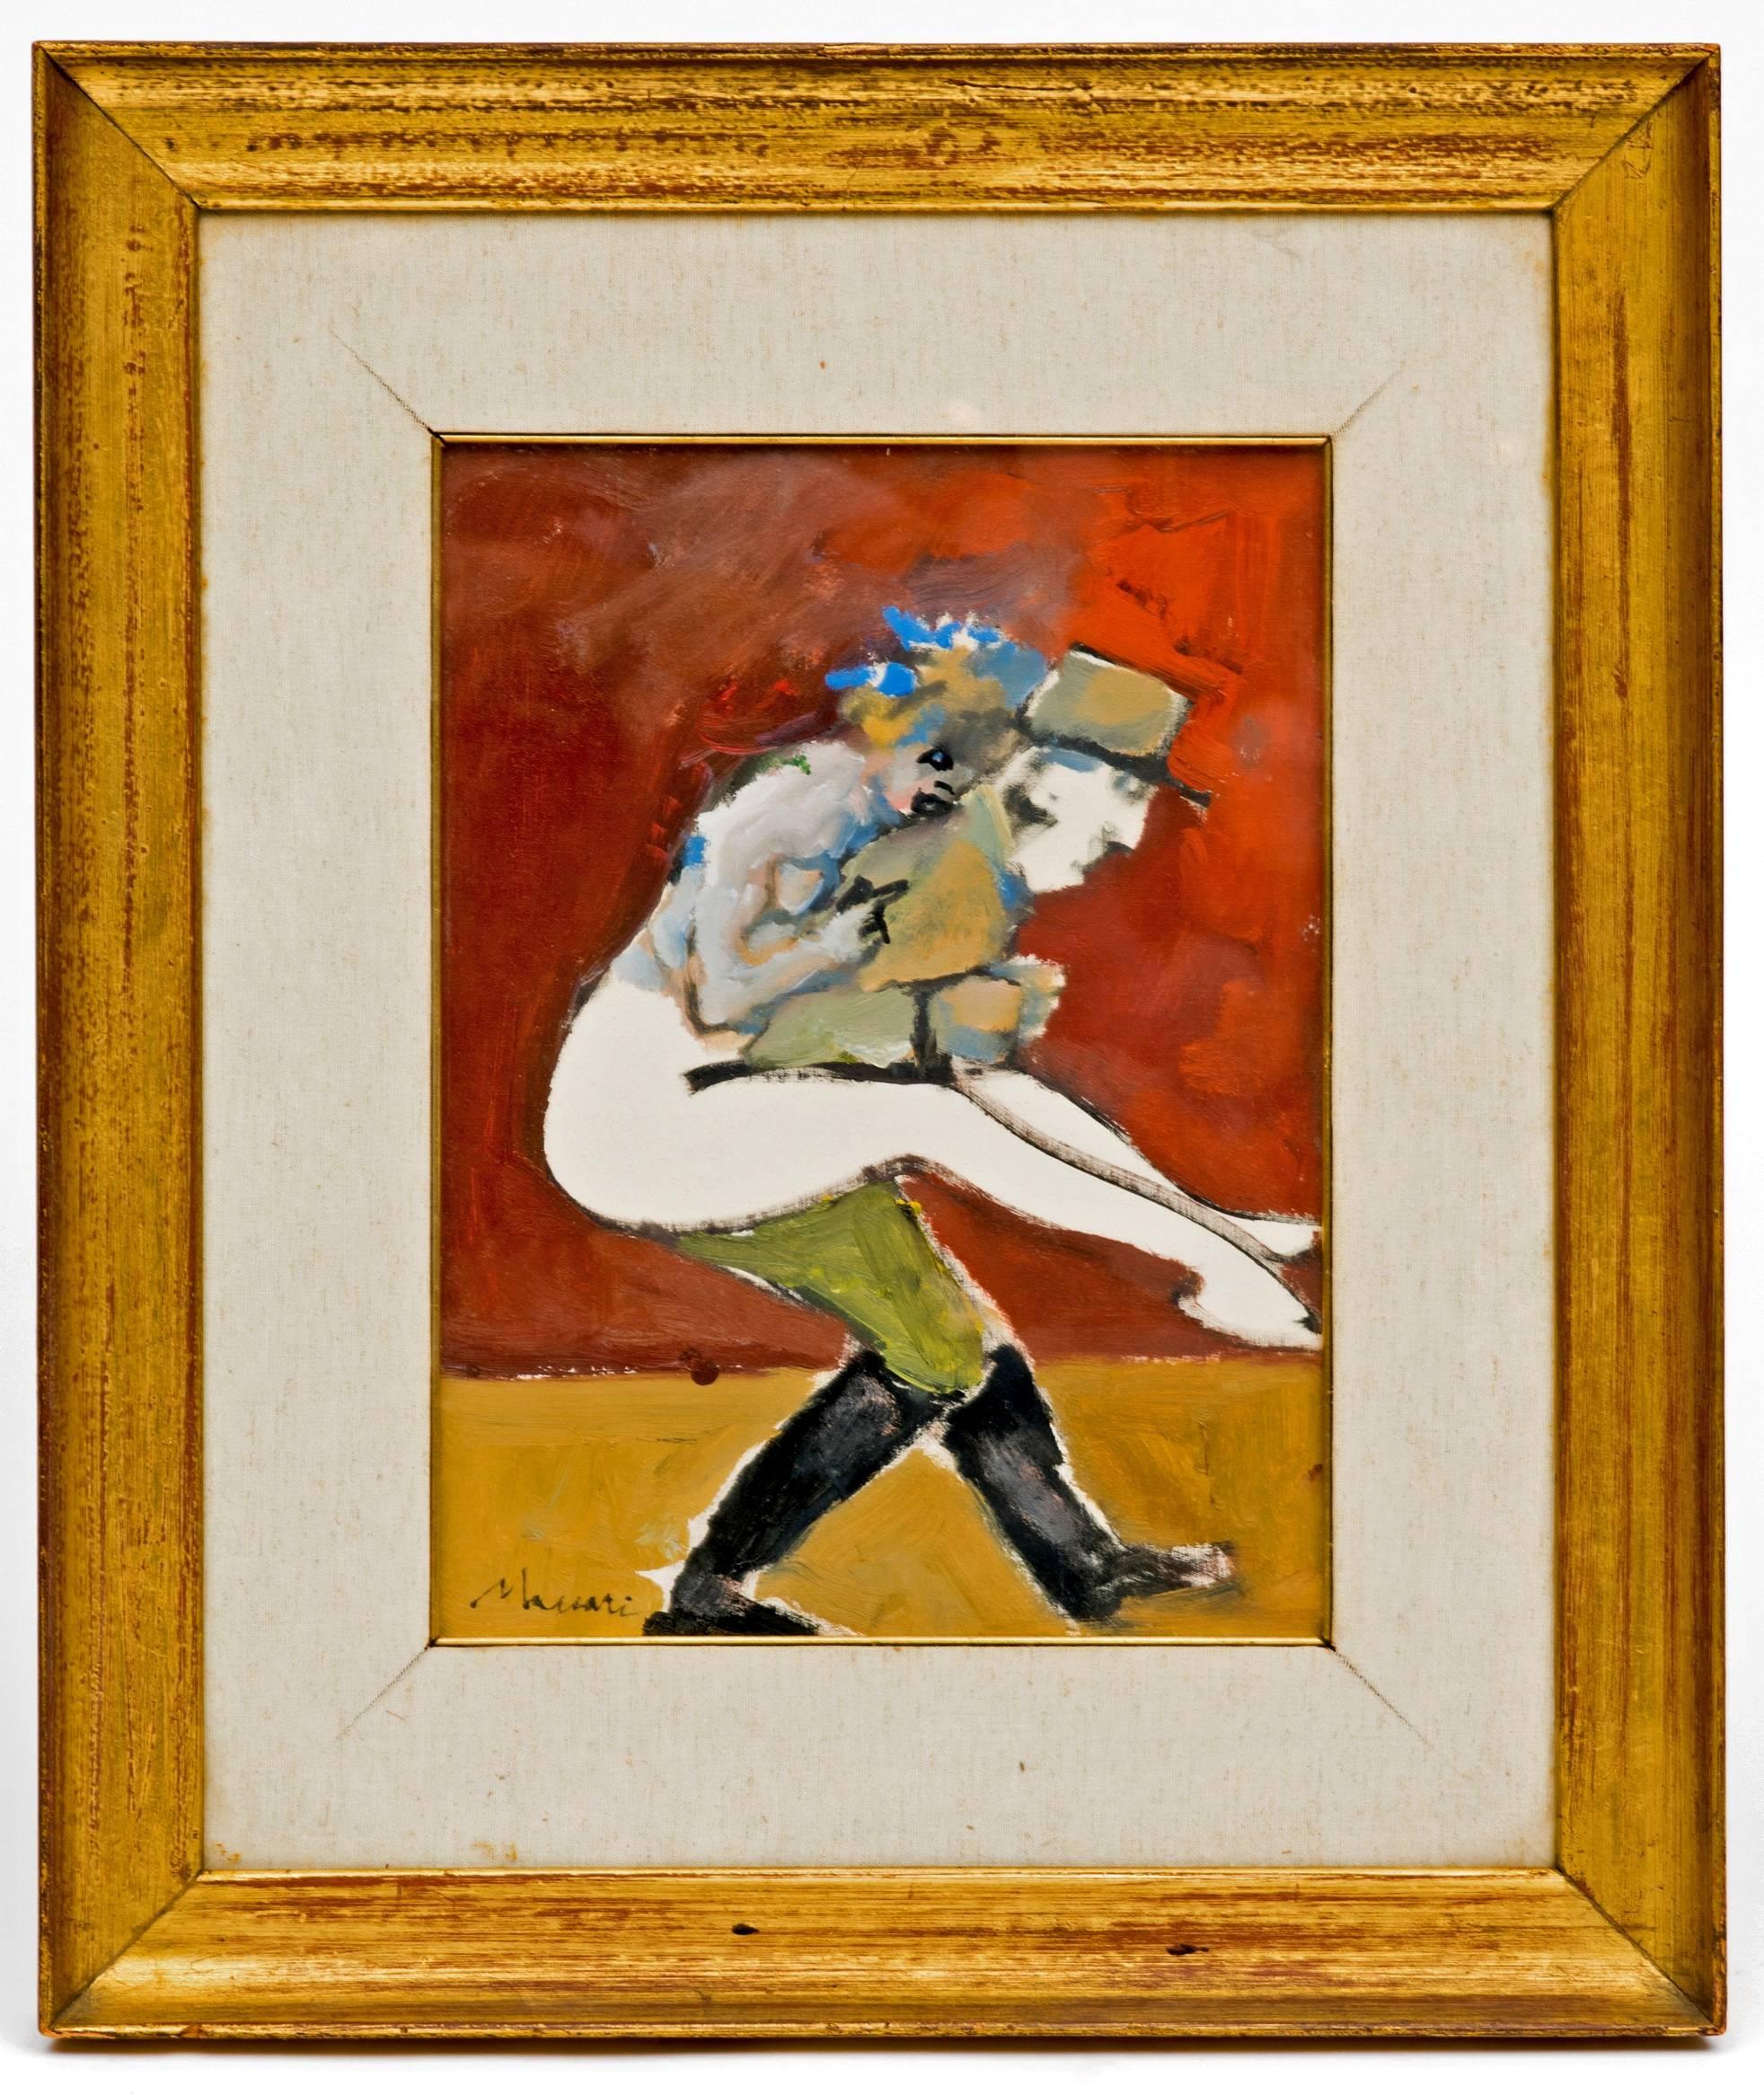 Fabulous vintage abstract painting of a French gendarme with a woman over his back circa 1950's. This painting is oil on board, with a linen mat framed under glass in a gold leaf frame. Great characters! 
From the estate of a Texas Oil Heiress known